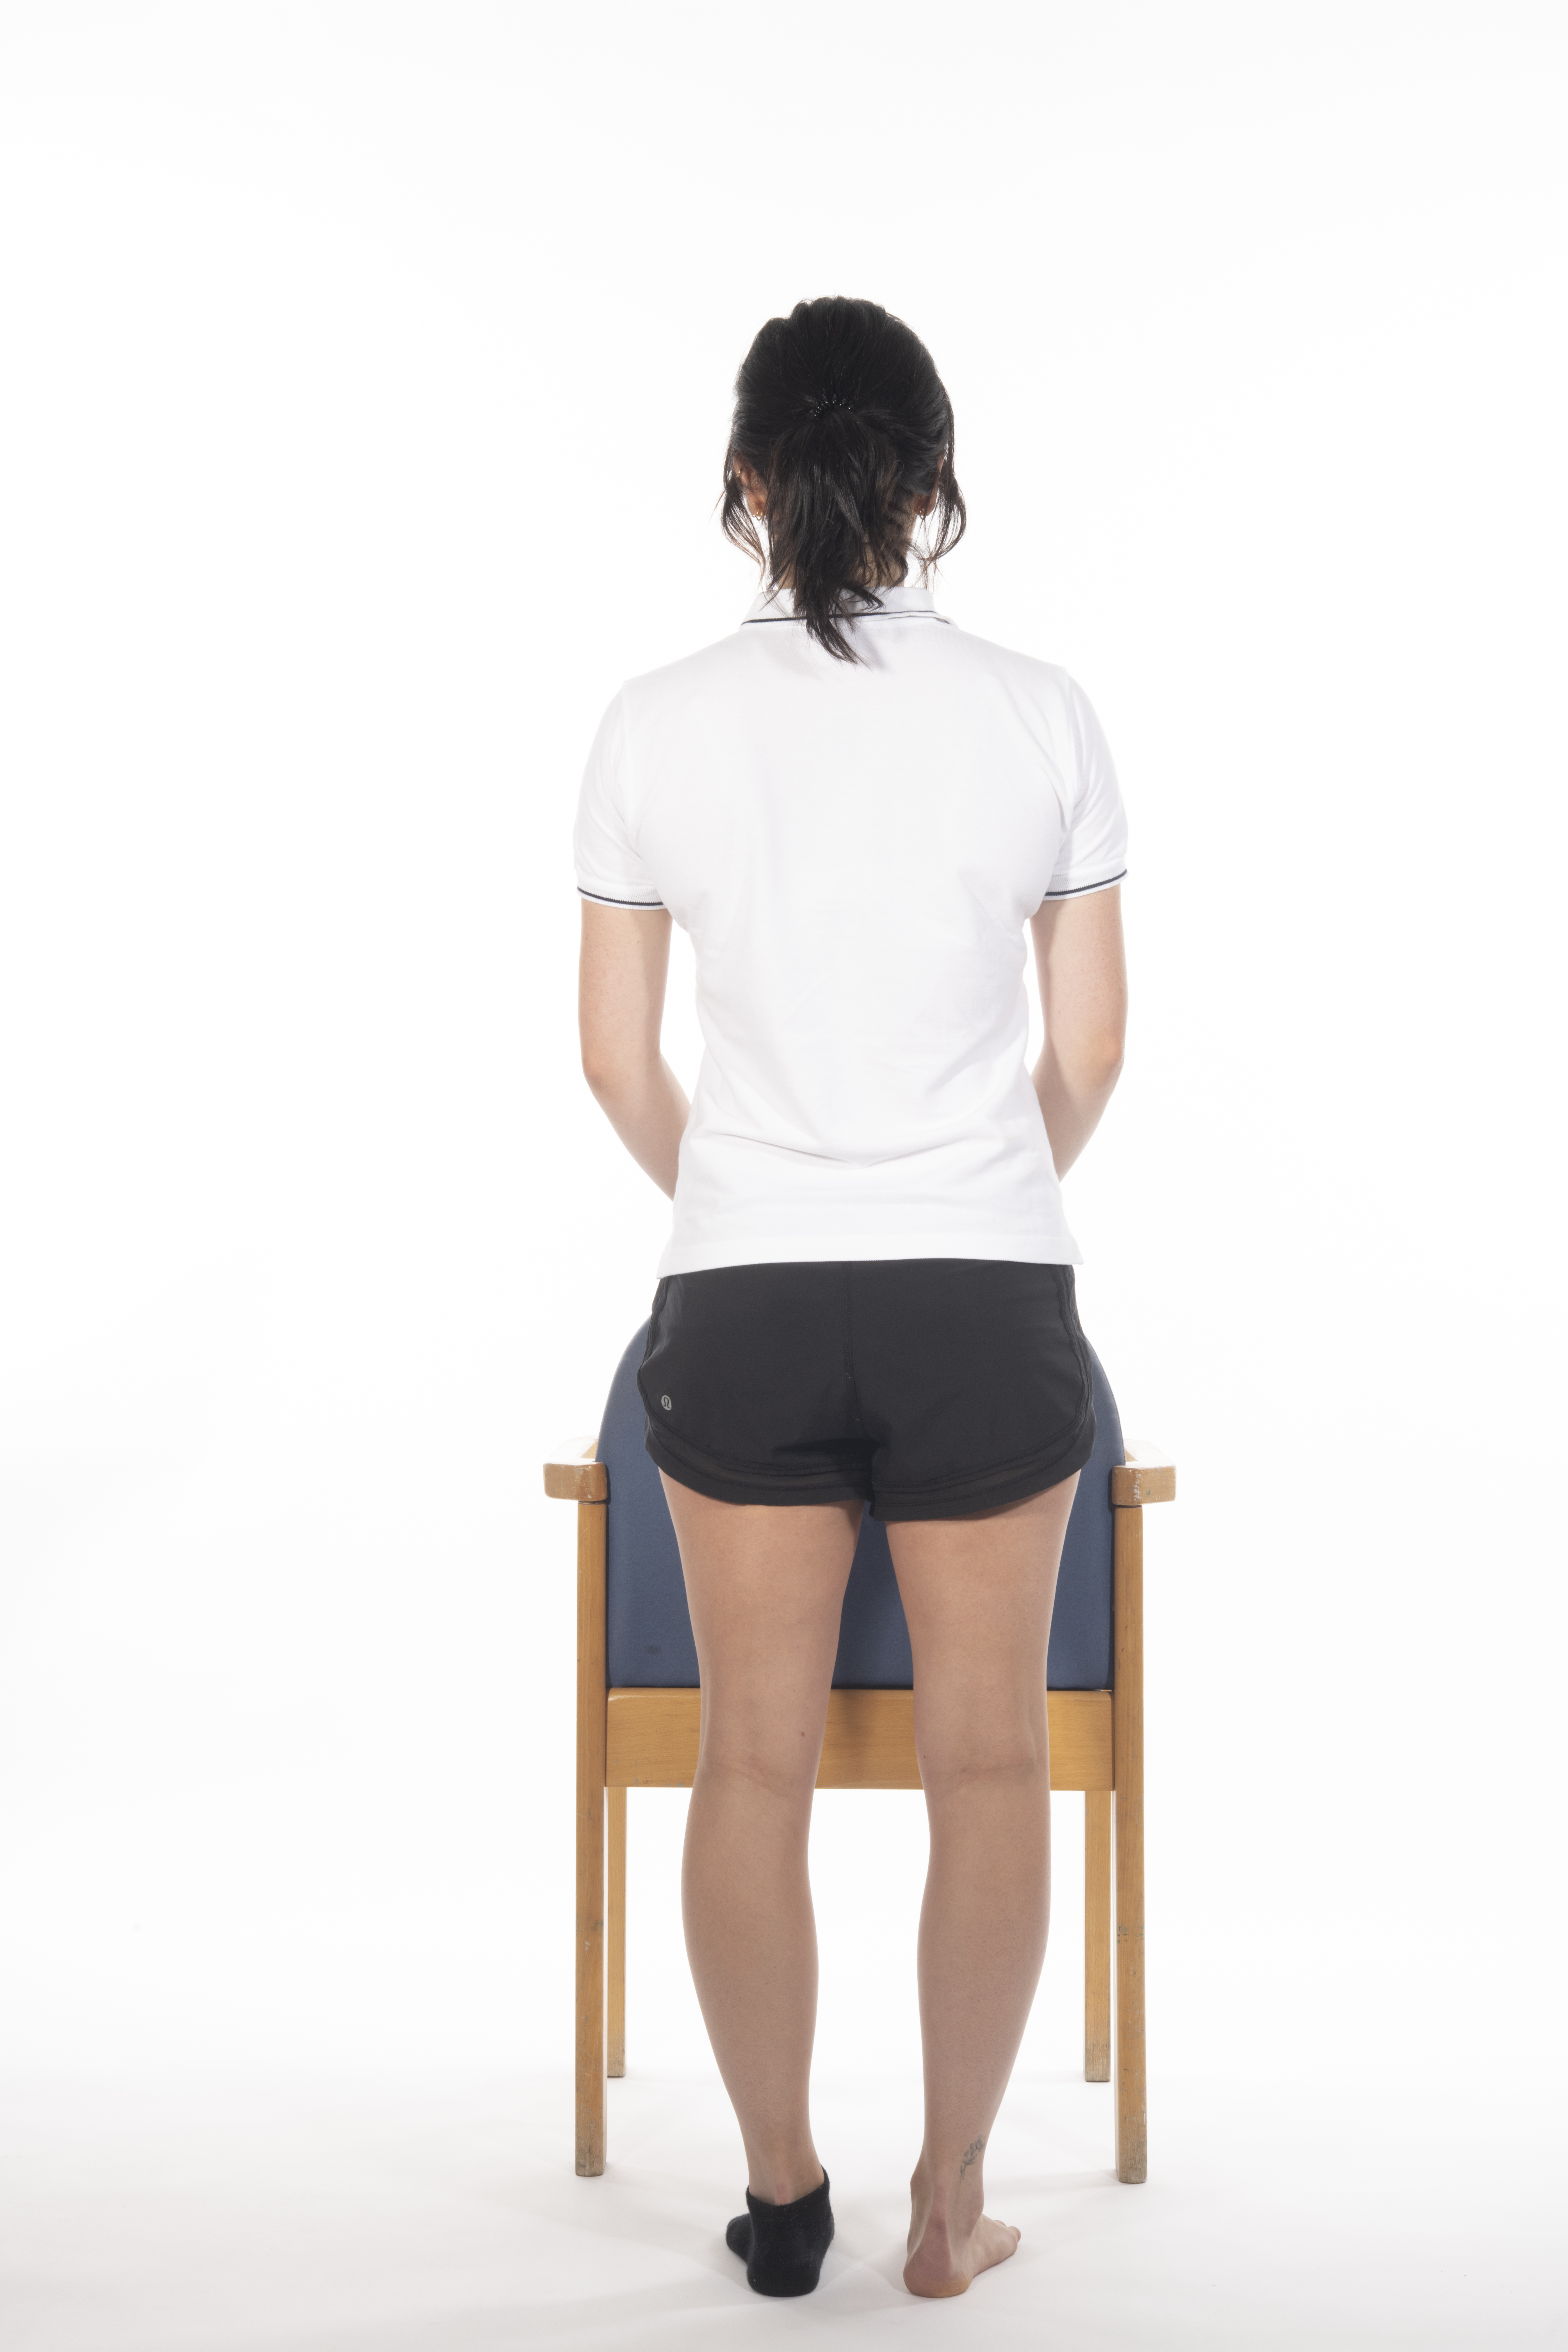 Hip abduction in standing exercise; stand and hold onto a solid support